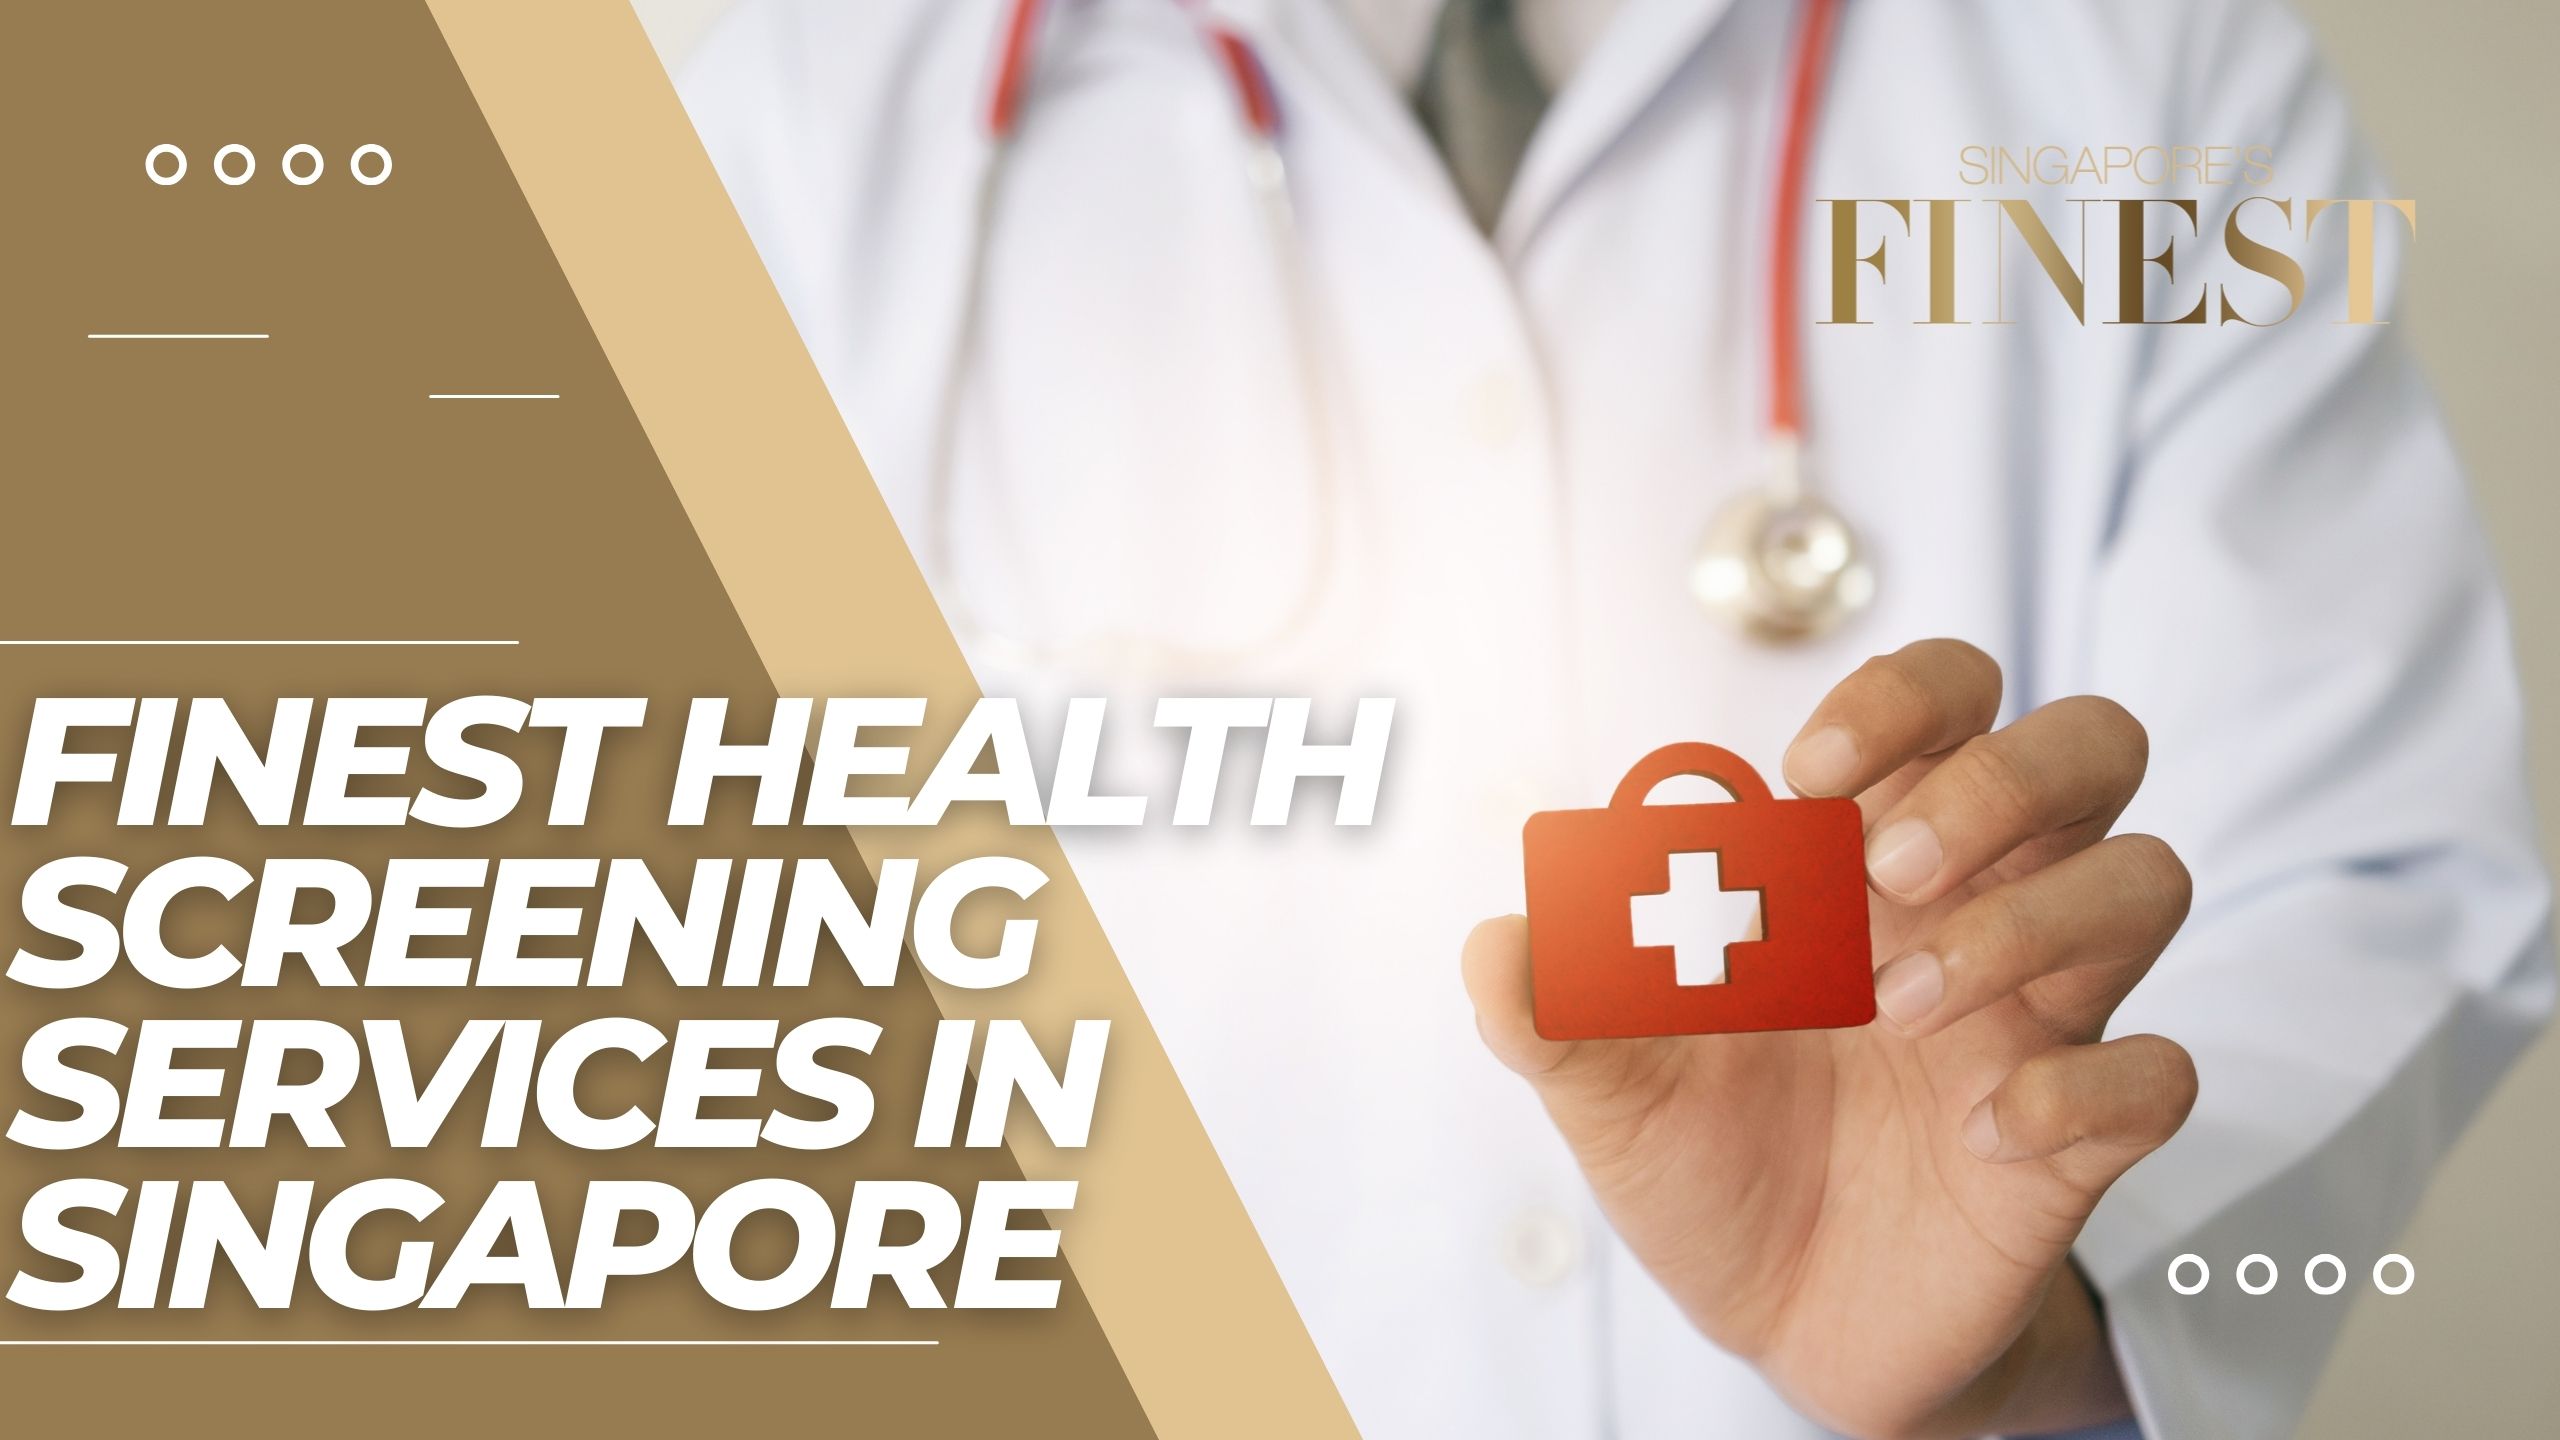 The Finest Health Screening Services in Singapore